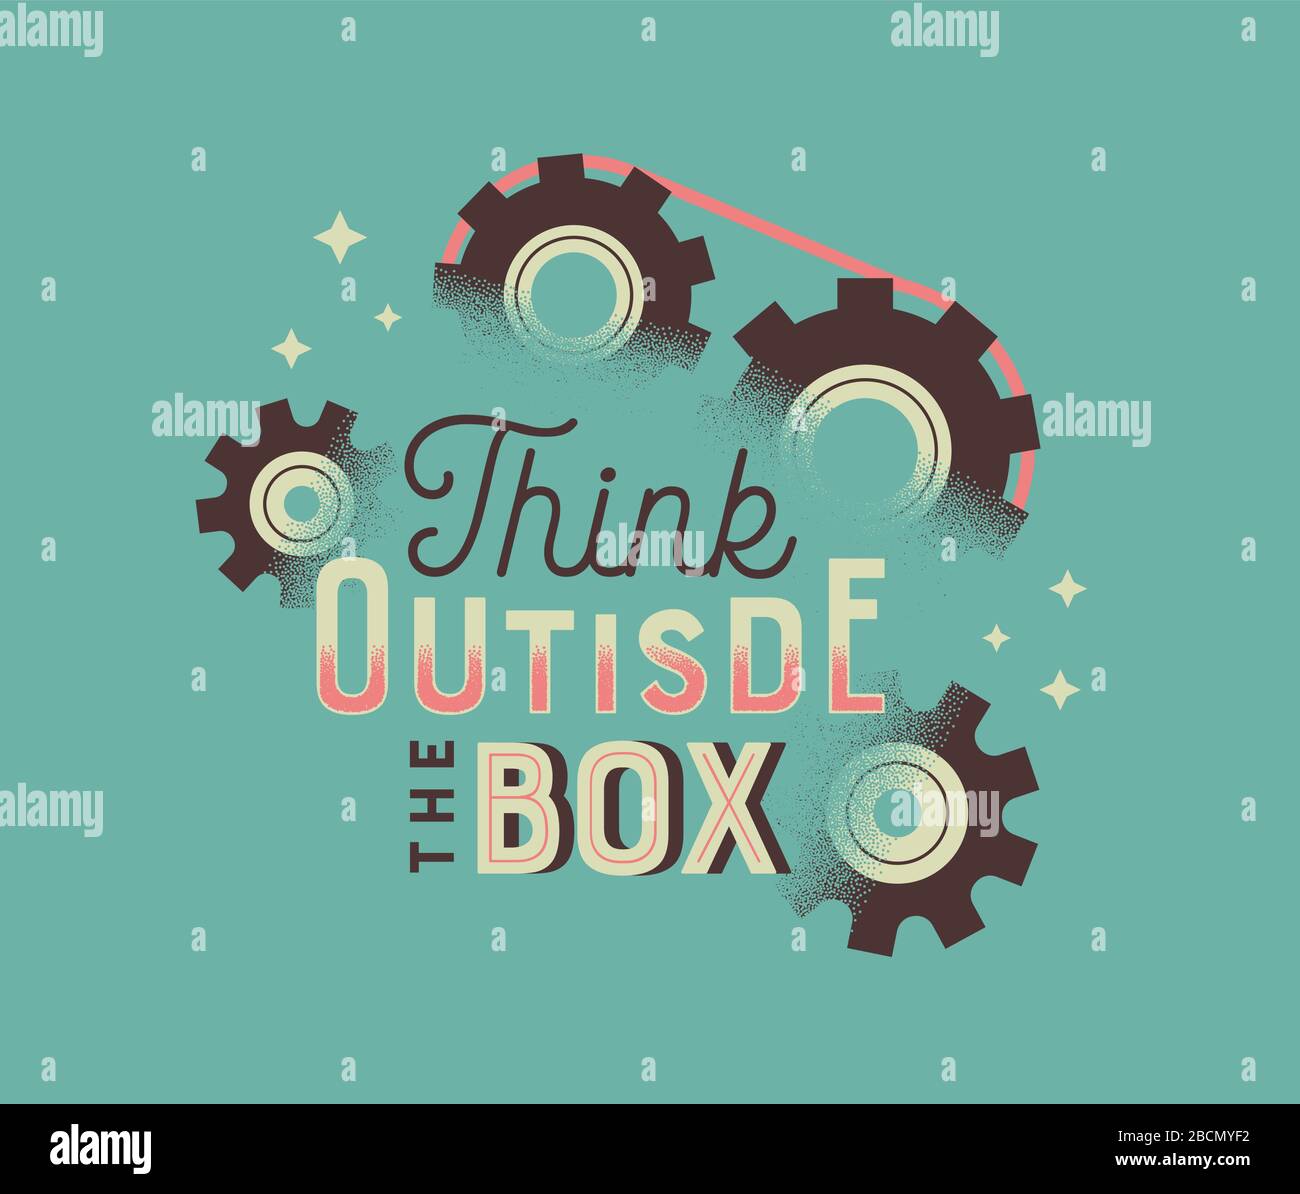 Think outisde the box typography quote poster illustration. Retro style lettering text design with motivational message for creative inspiration, work Stock Vector